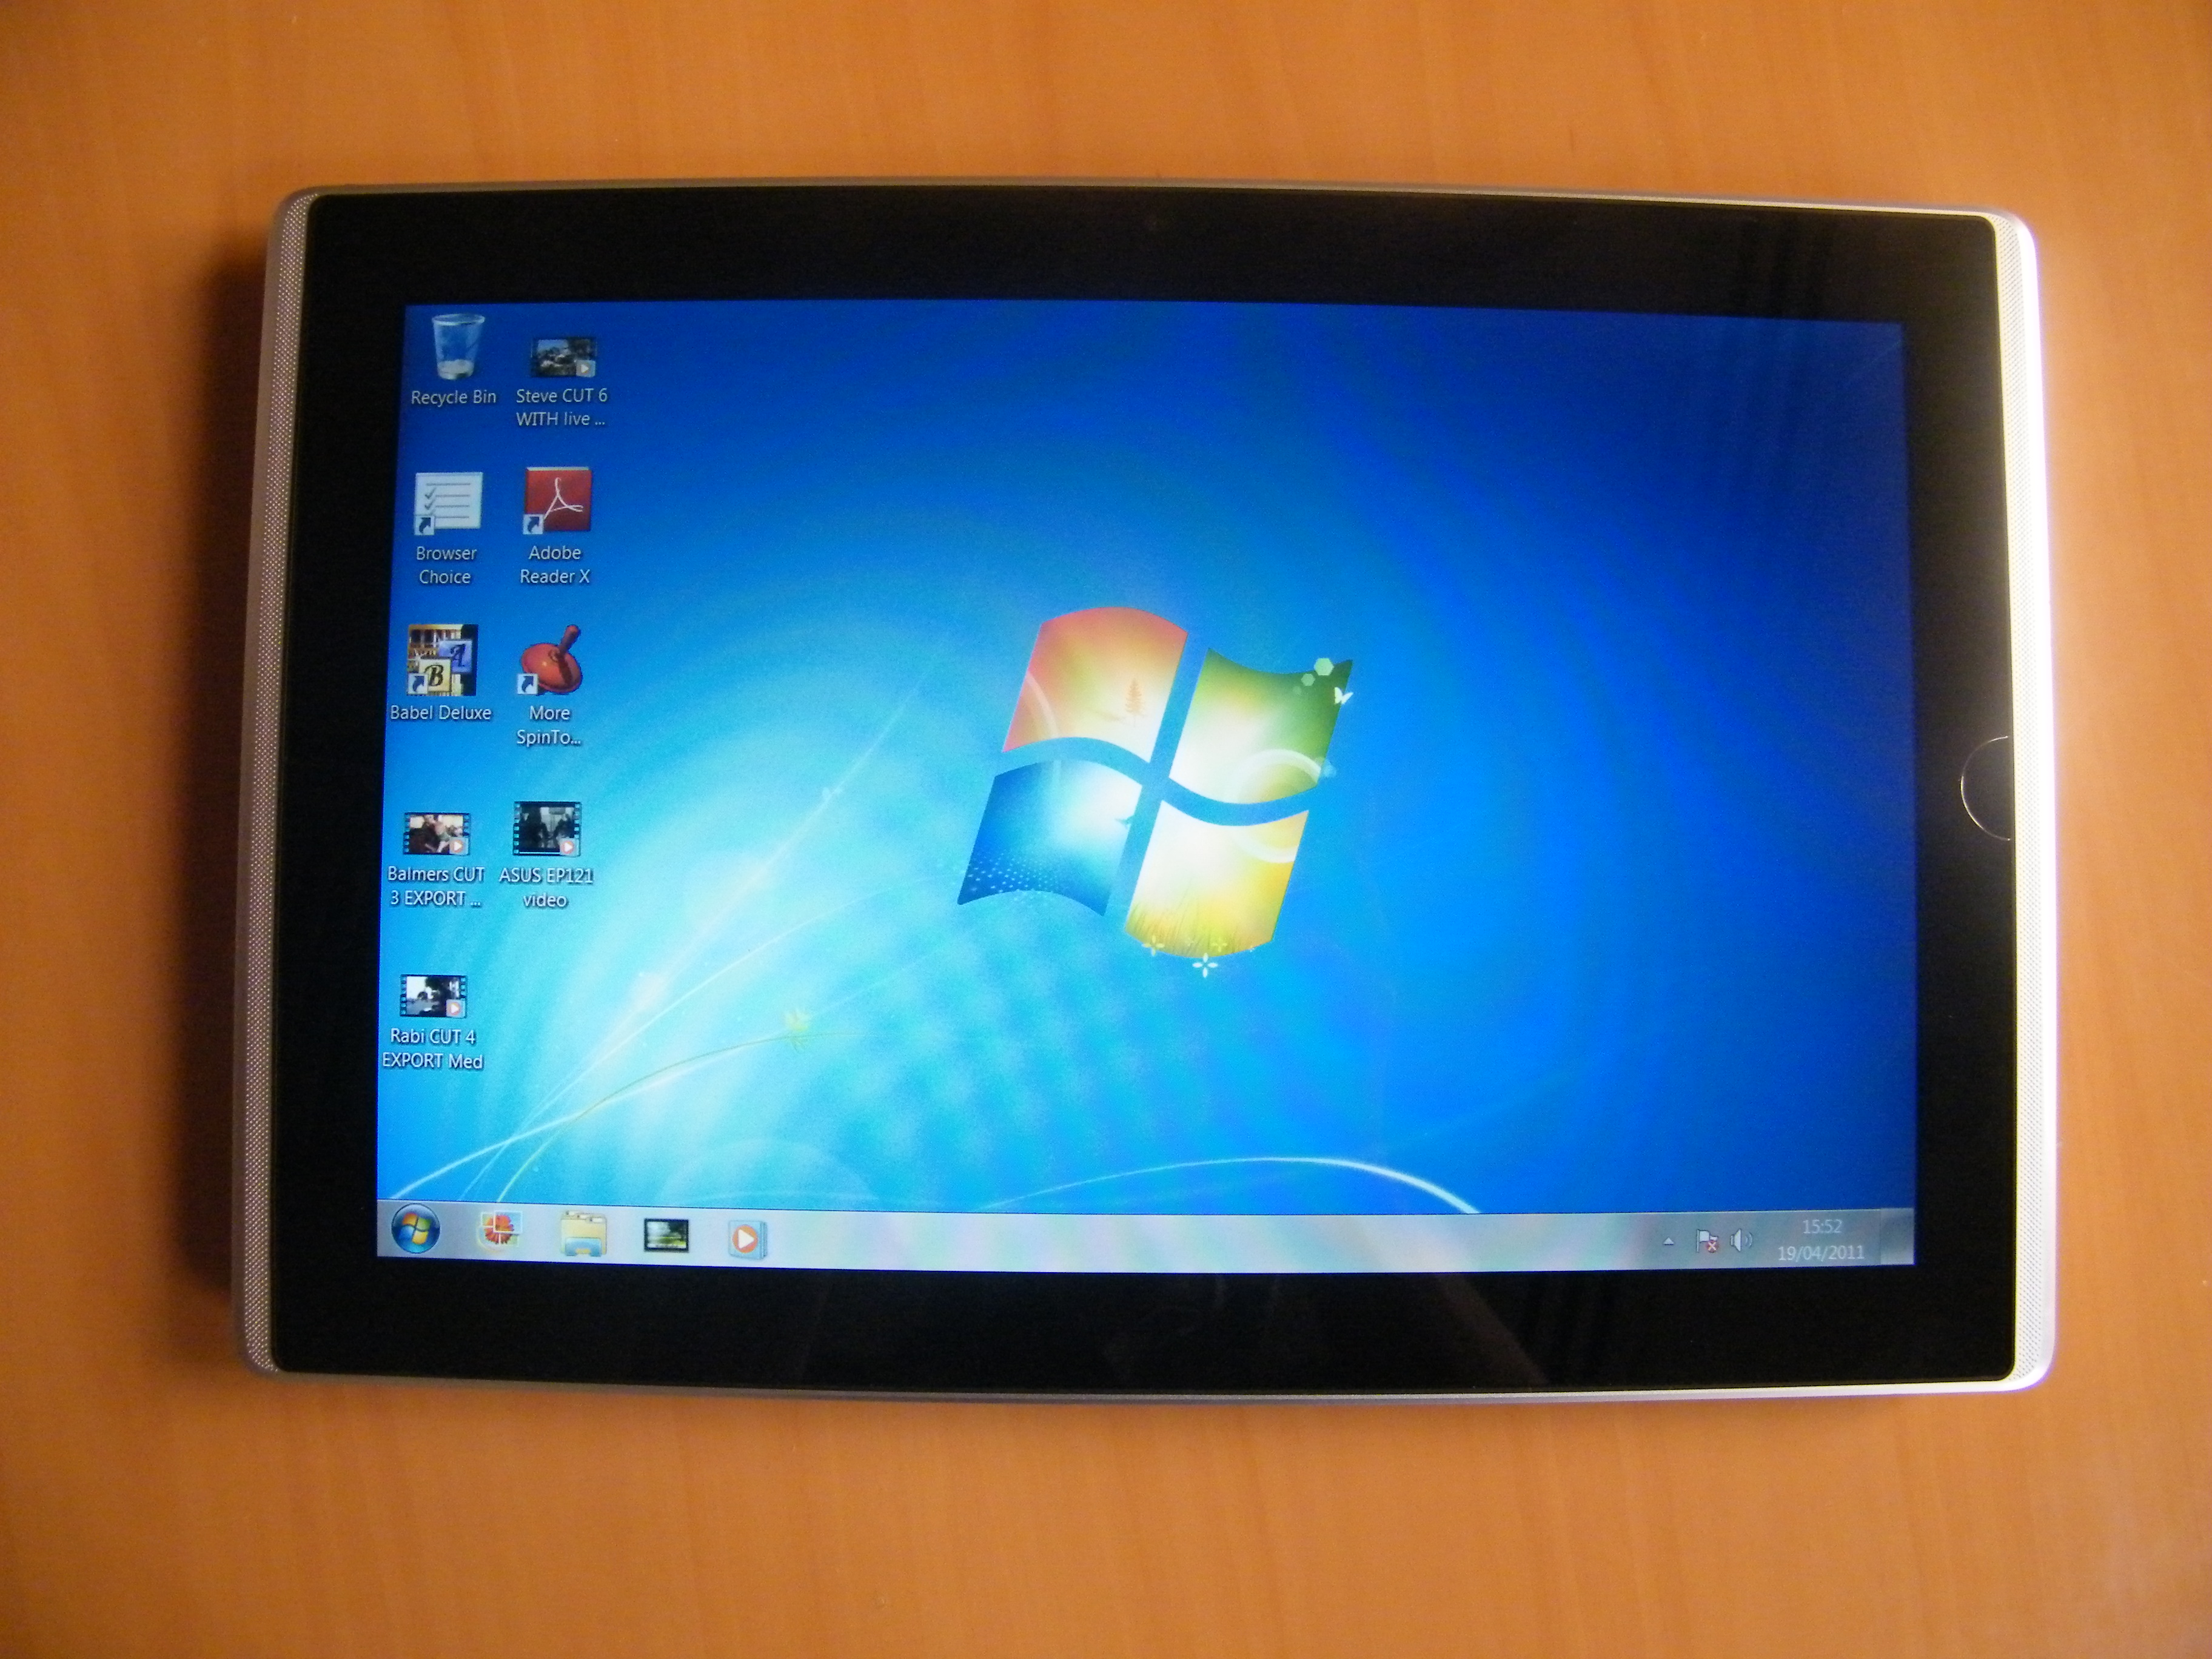 Intel: Windows 7 tablets can outperform iPad 2